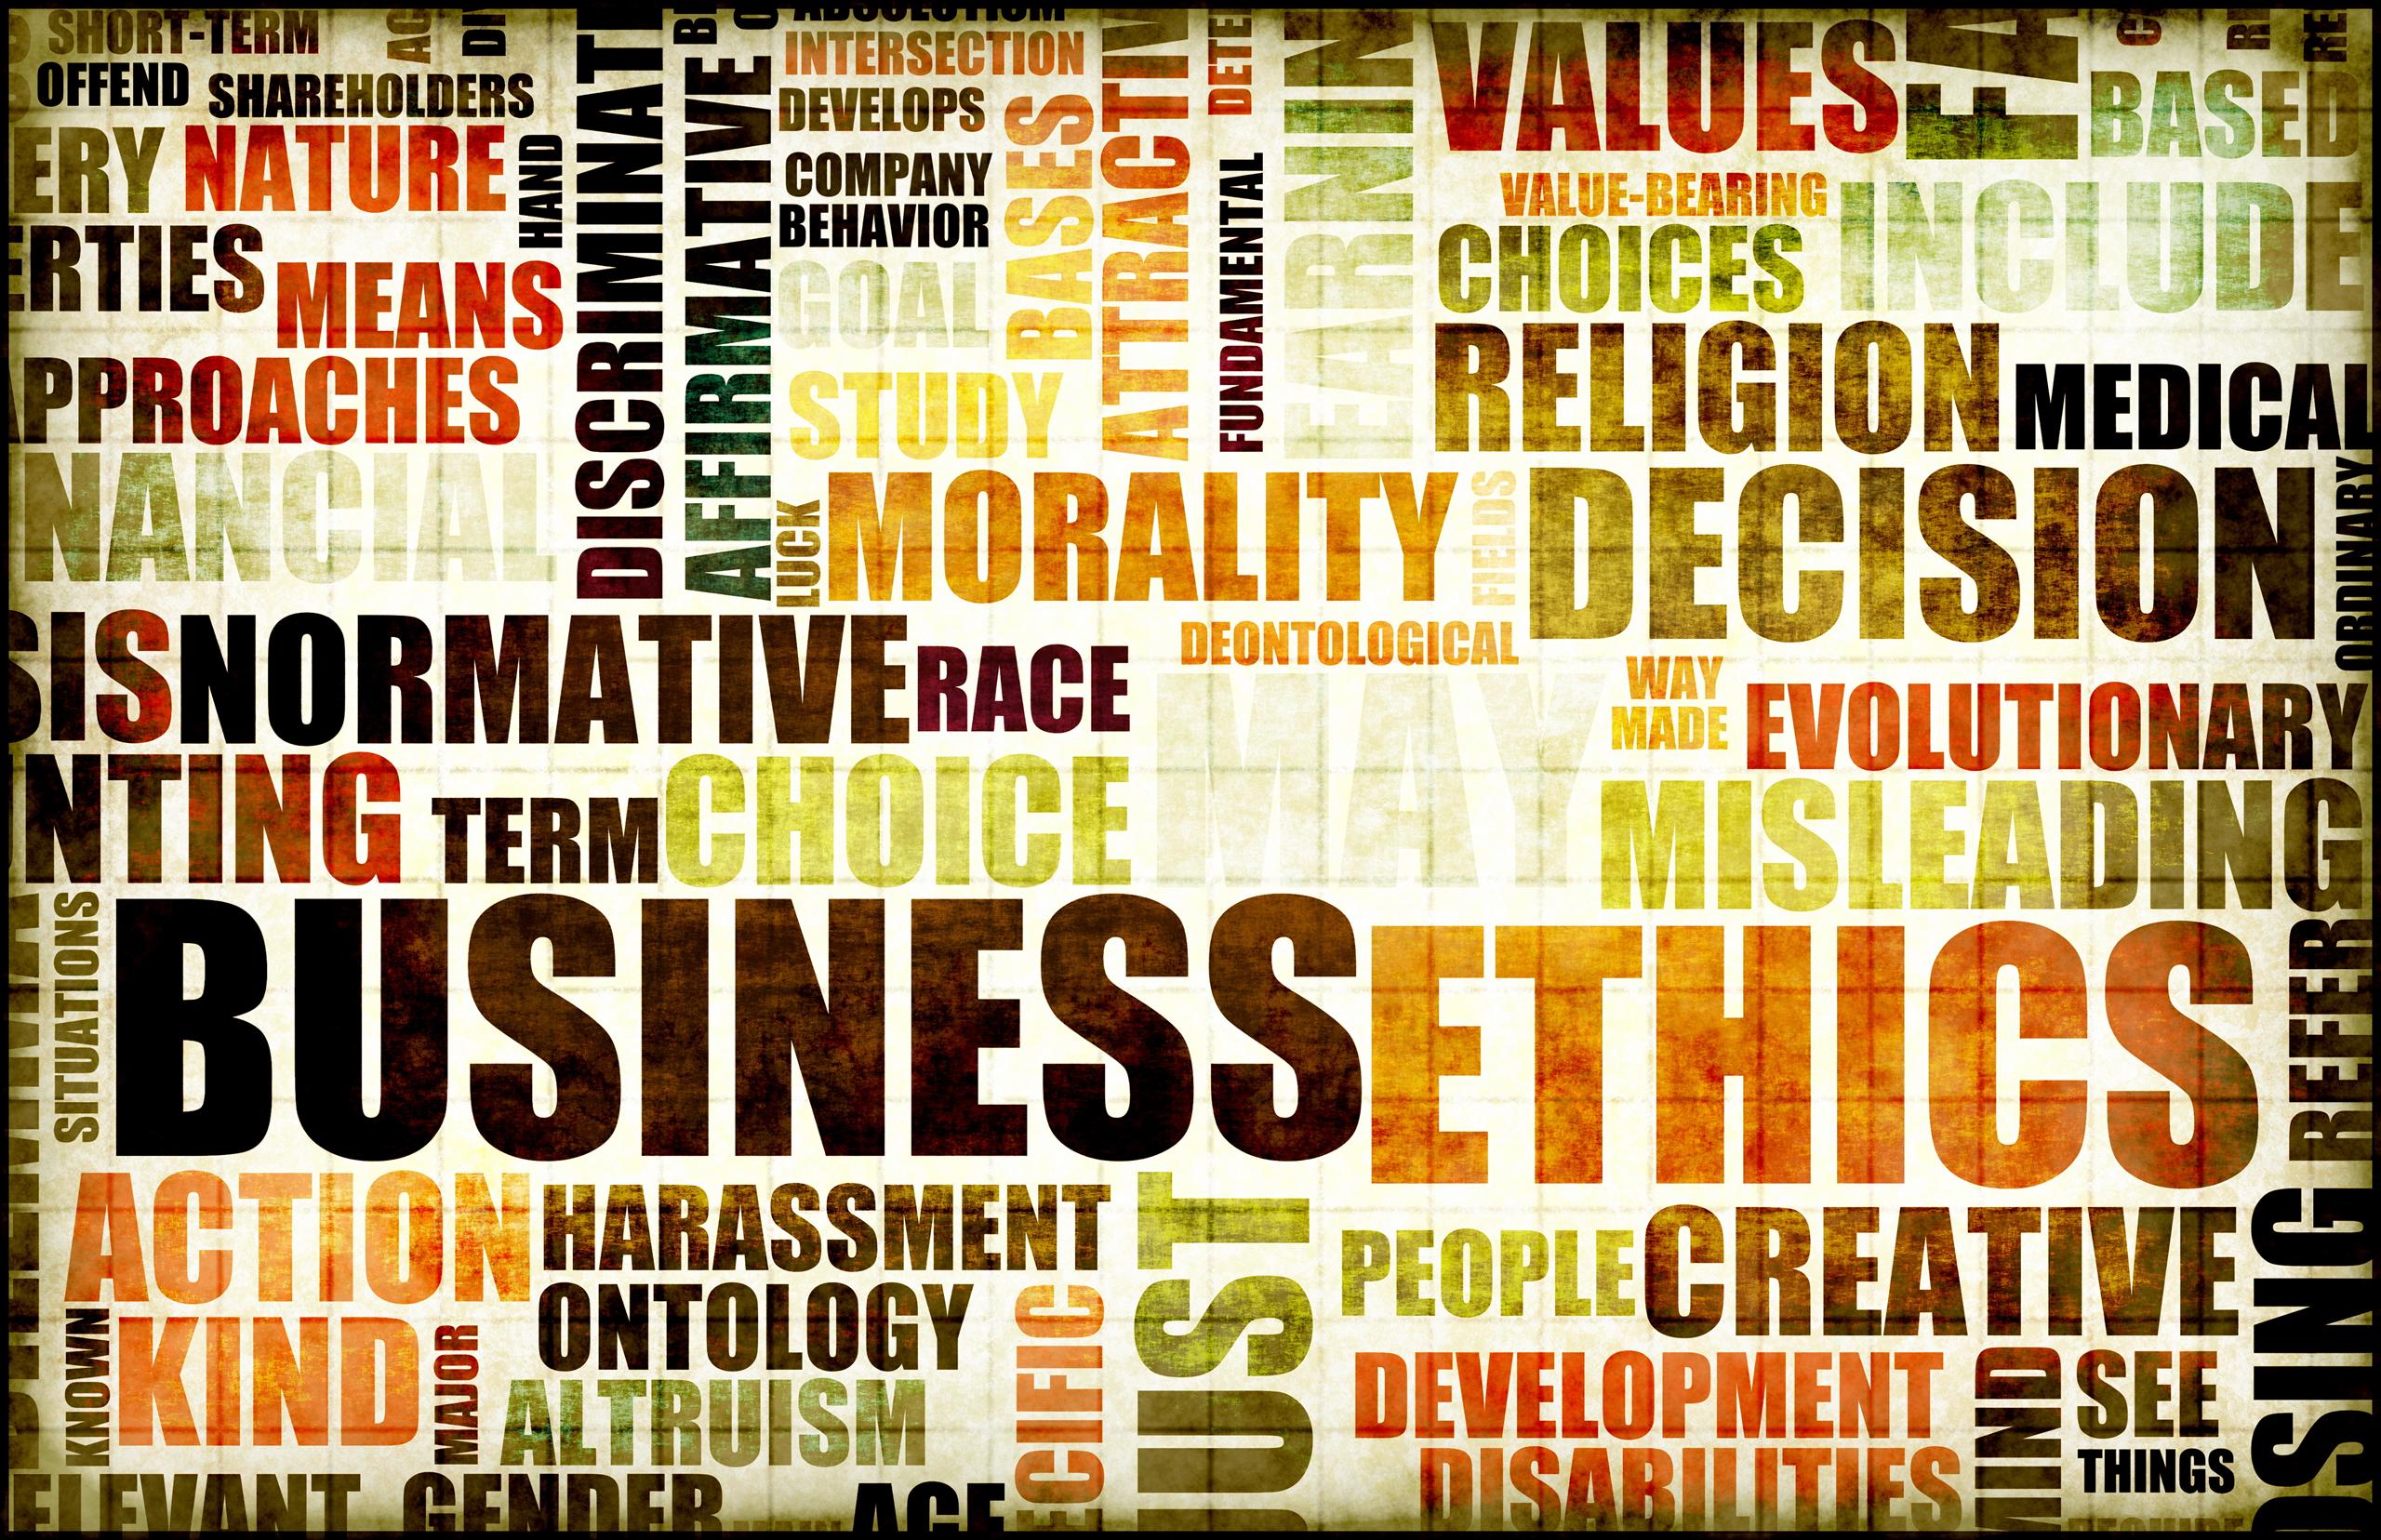 typographic image showing the term 'business ethics' and related words